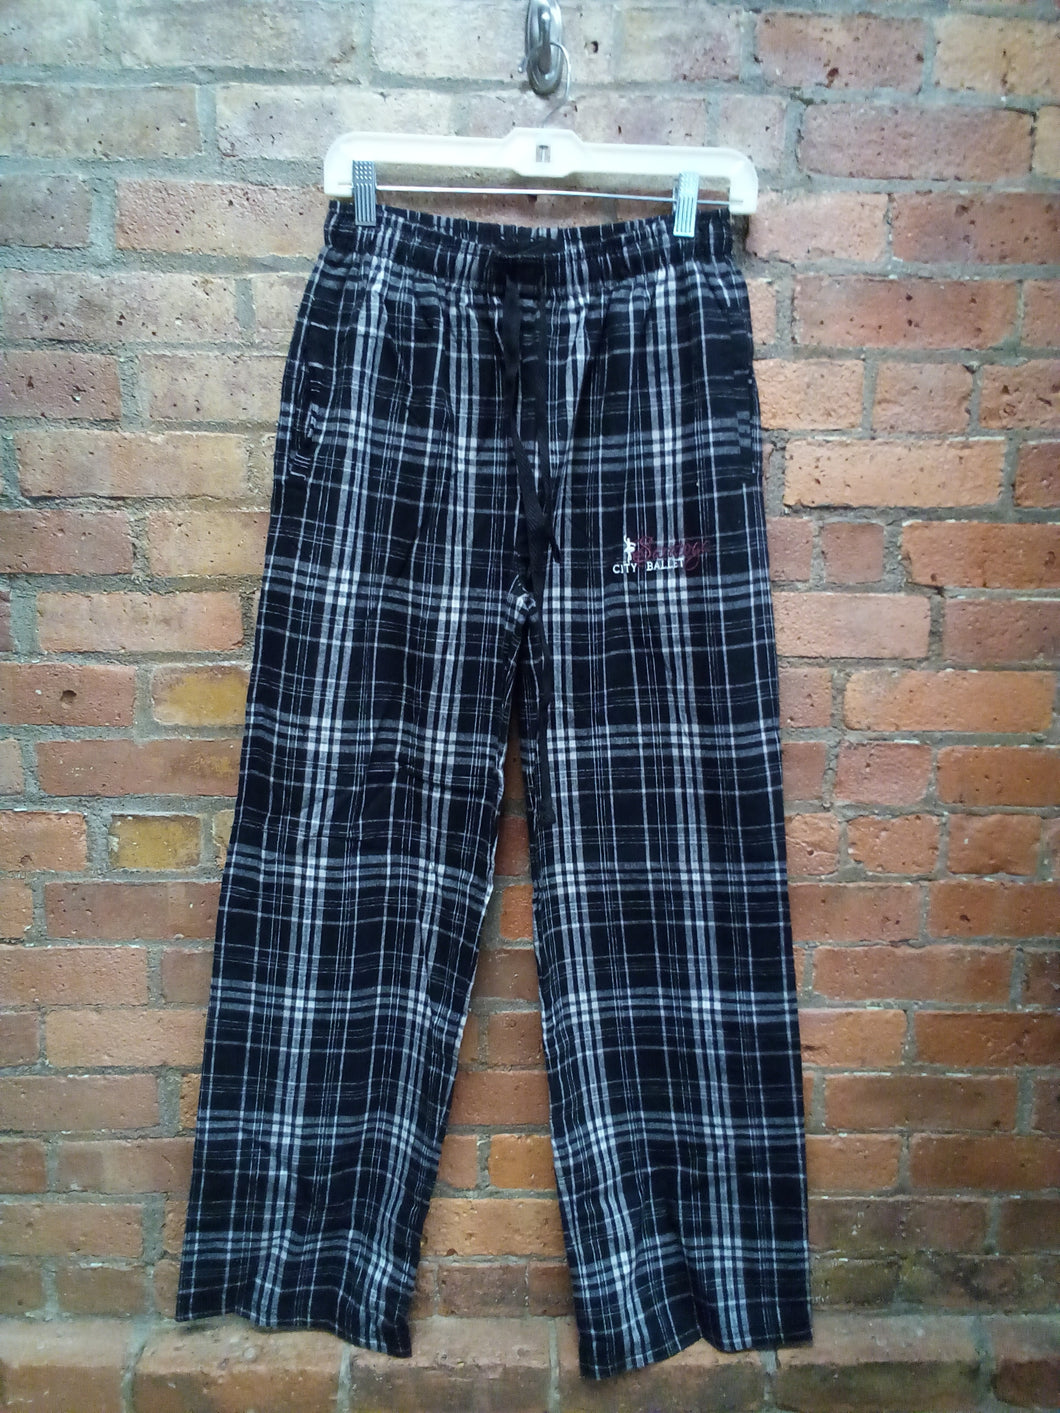 CLEARANCE - Saratoga City Ballet Flannel Pajama Pants - Size Small